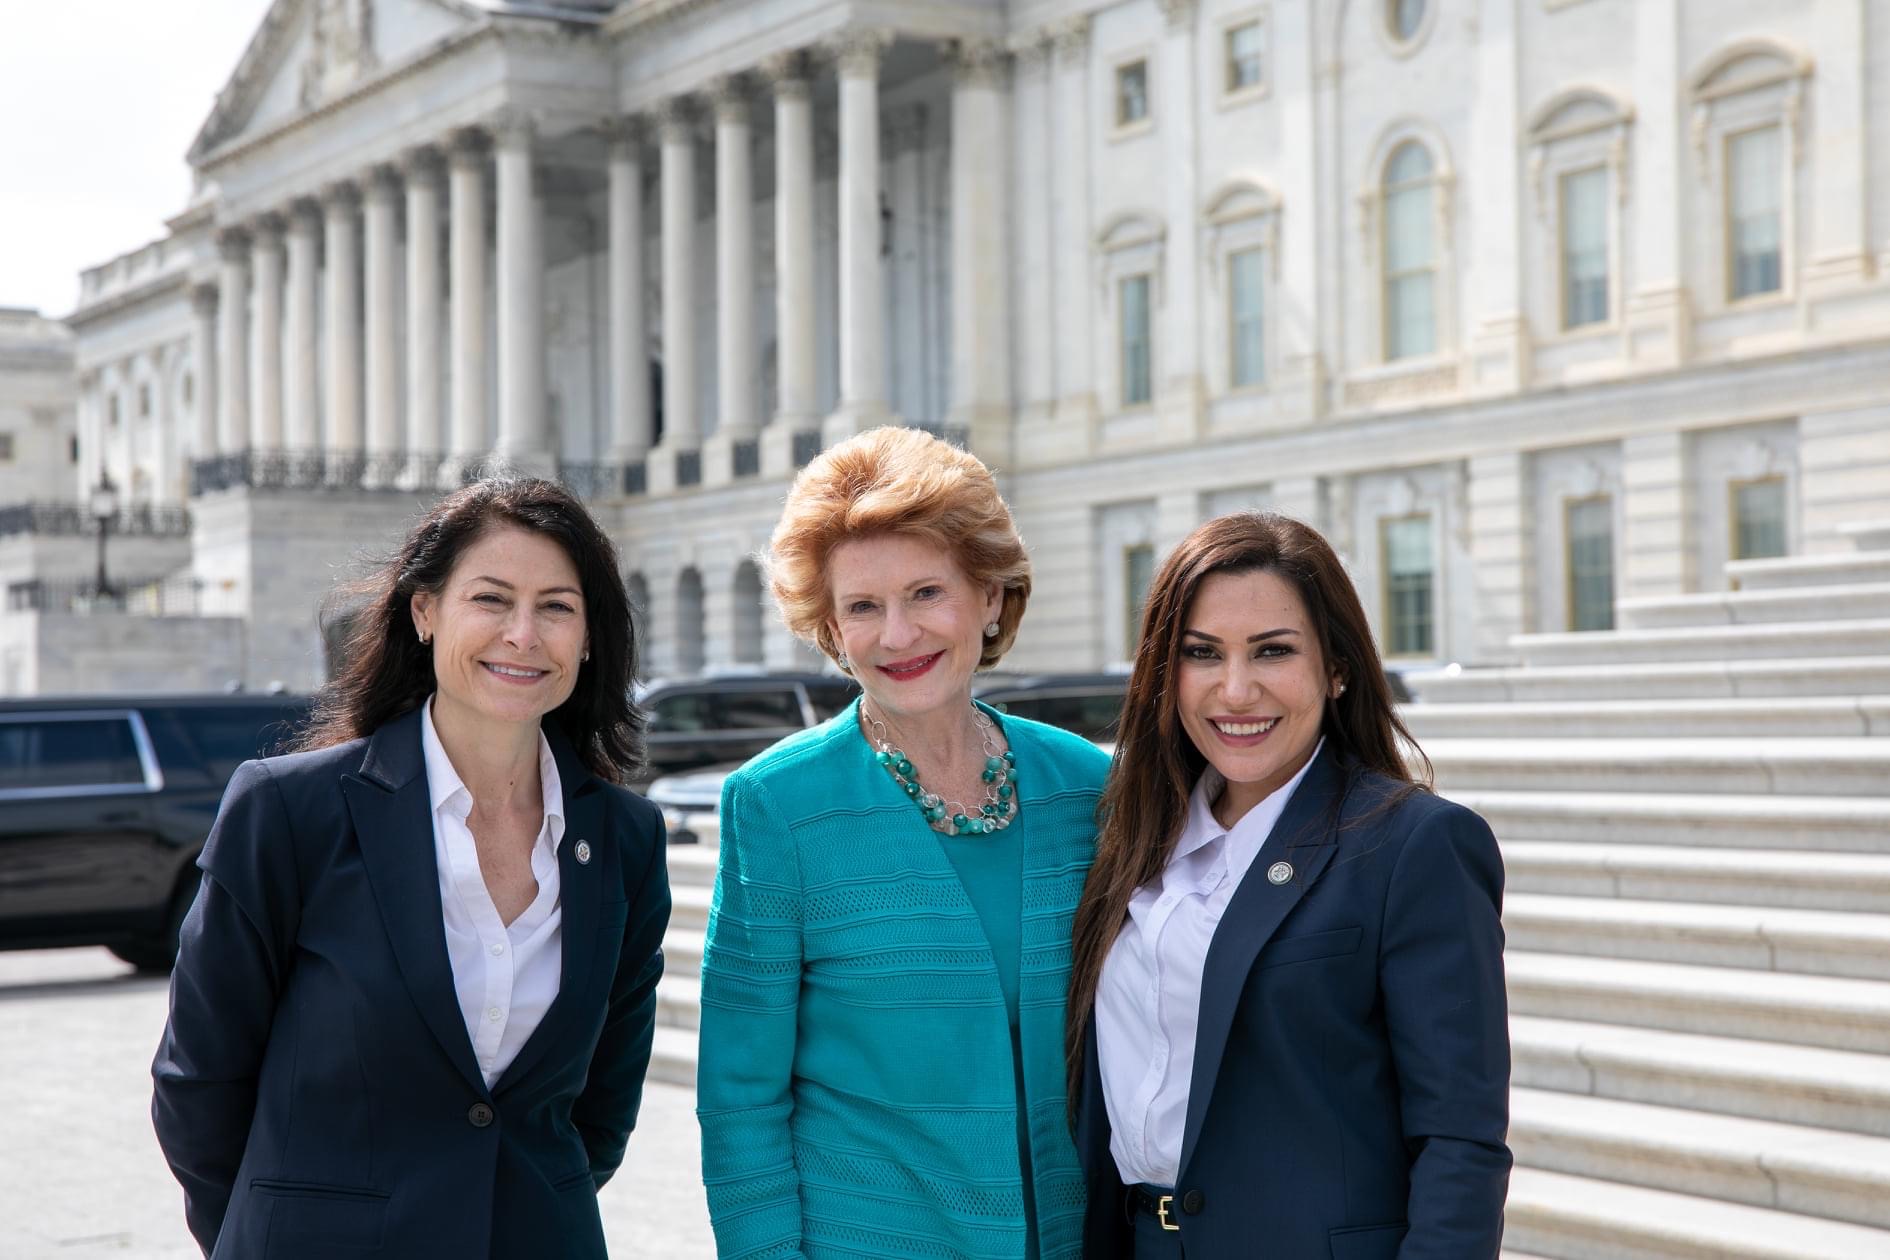 Michigan Solicitor General Fadwa Hammoud stands with Michigan Attorney General Dana Nessel, and U.S. Senators Debbie Stabenow (D-MI) at the steps of the U.S. Supreme Court in Washington, D.C., Oct 5. Photo: Debbie Stabenow's office.